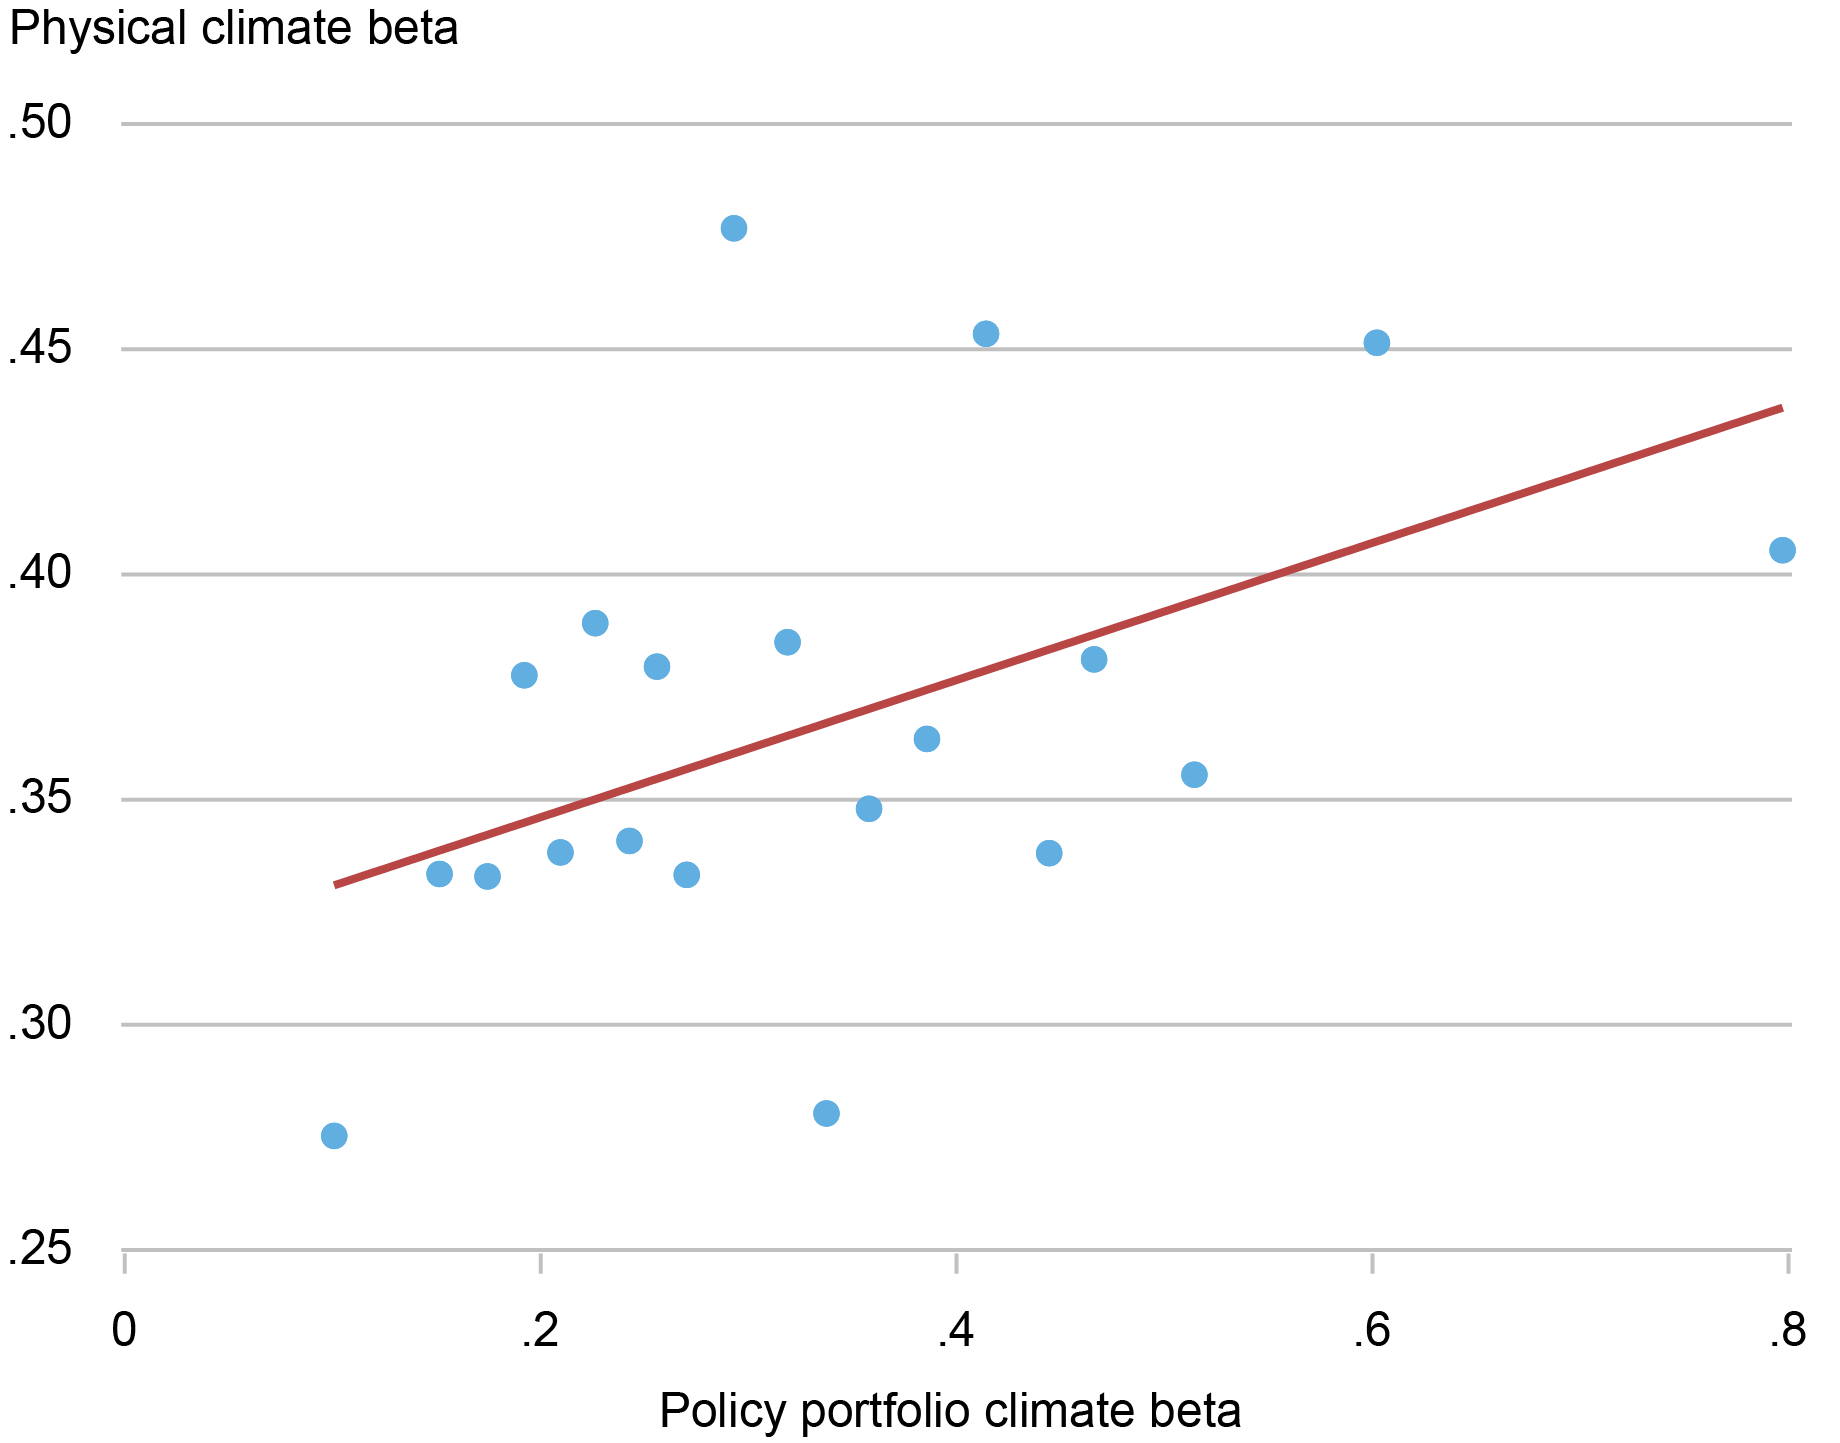 scatter plot comparing stock-based insurers’ physical climate beta (based on insurers’ stock returns) with insurers’ policy portfolio beta